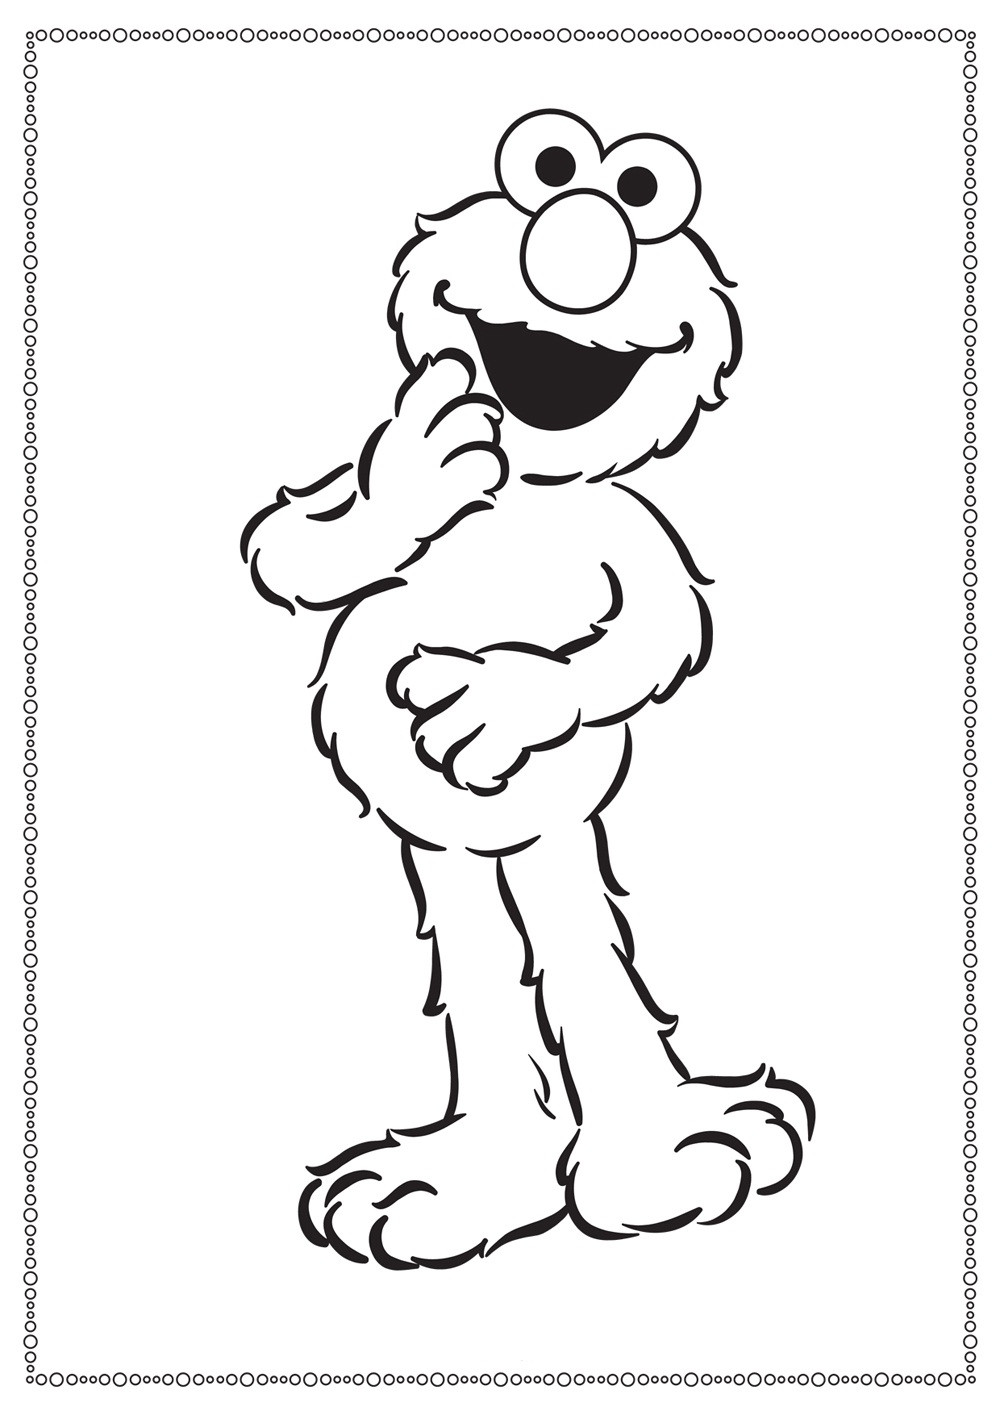 Free Printable Elmo Coloring Pages
 Free Printable Elmo Coloring Pages For Kids